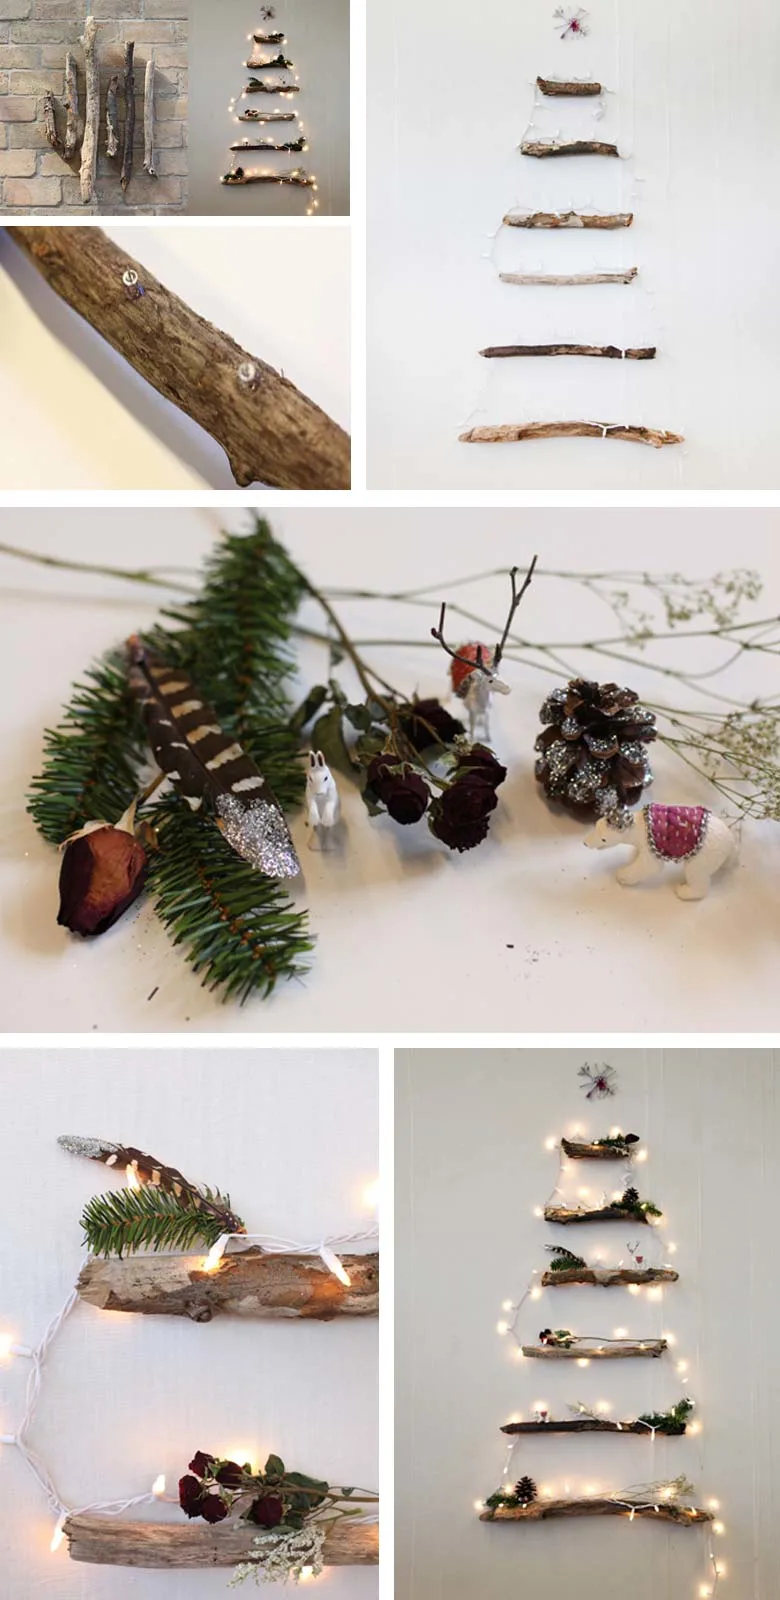 how to decorate a small living room for christmas - DIY Alternative Christmas Tree with Lighted Branches #smallspaces #tinyhouseliving #smallspaceliving #alternativechristmastree #christmastreedecorideas 